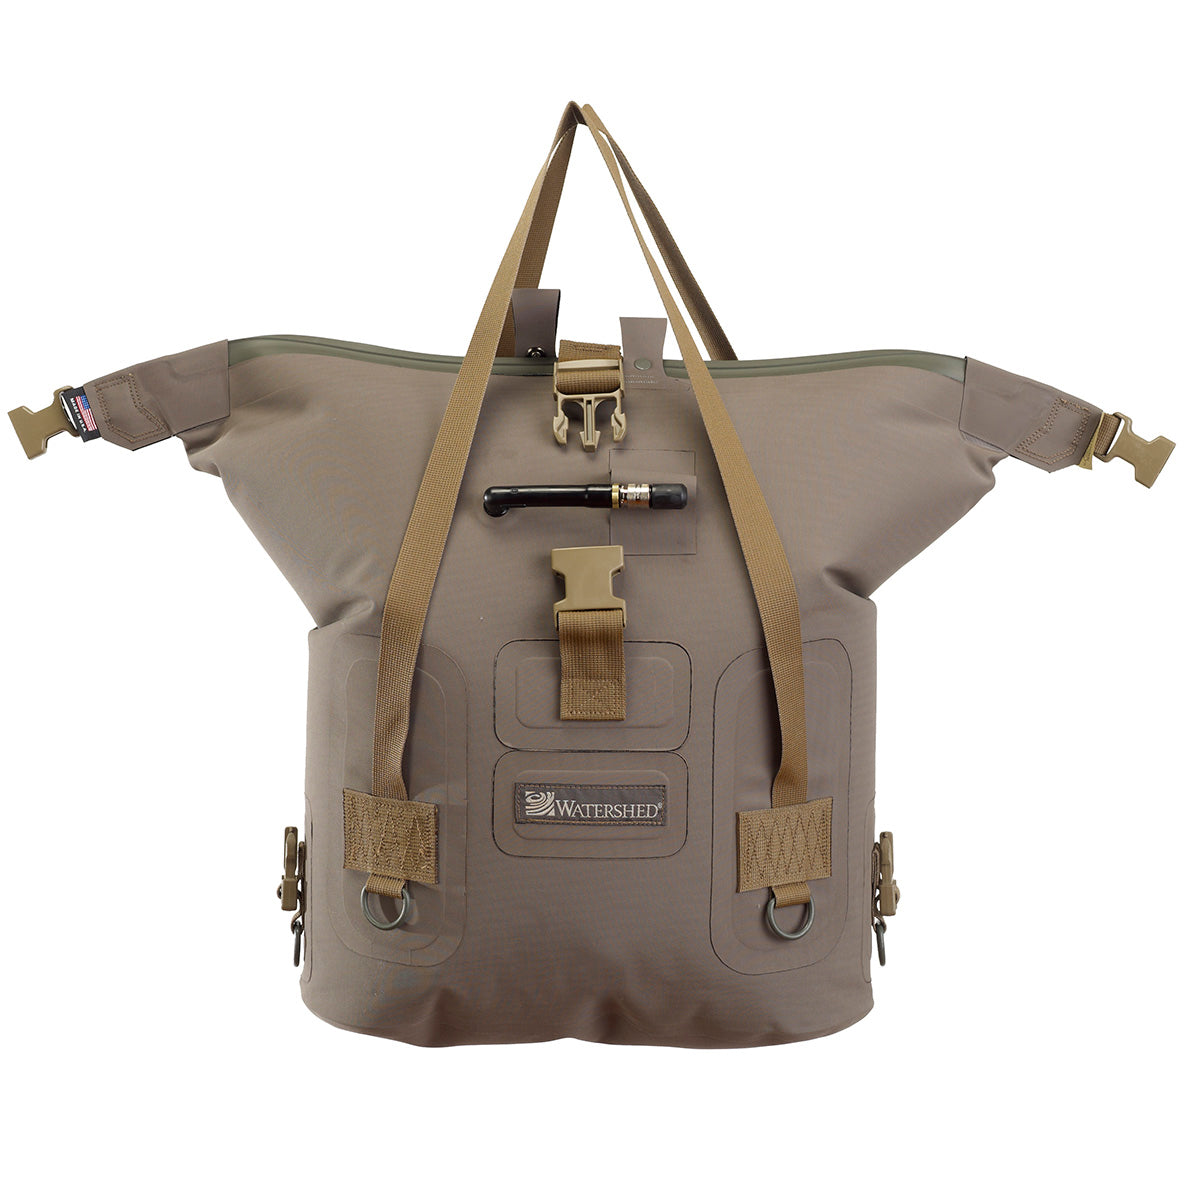 Watershed Tactical Tote